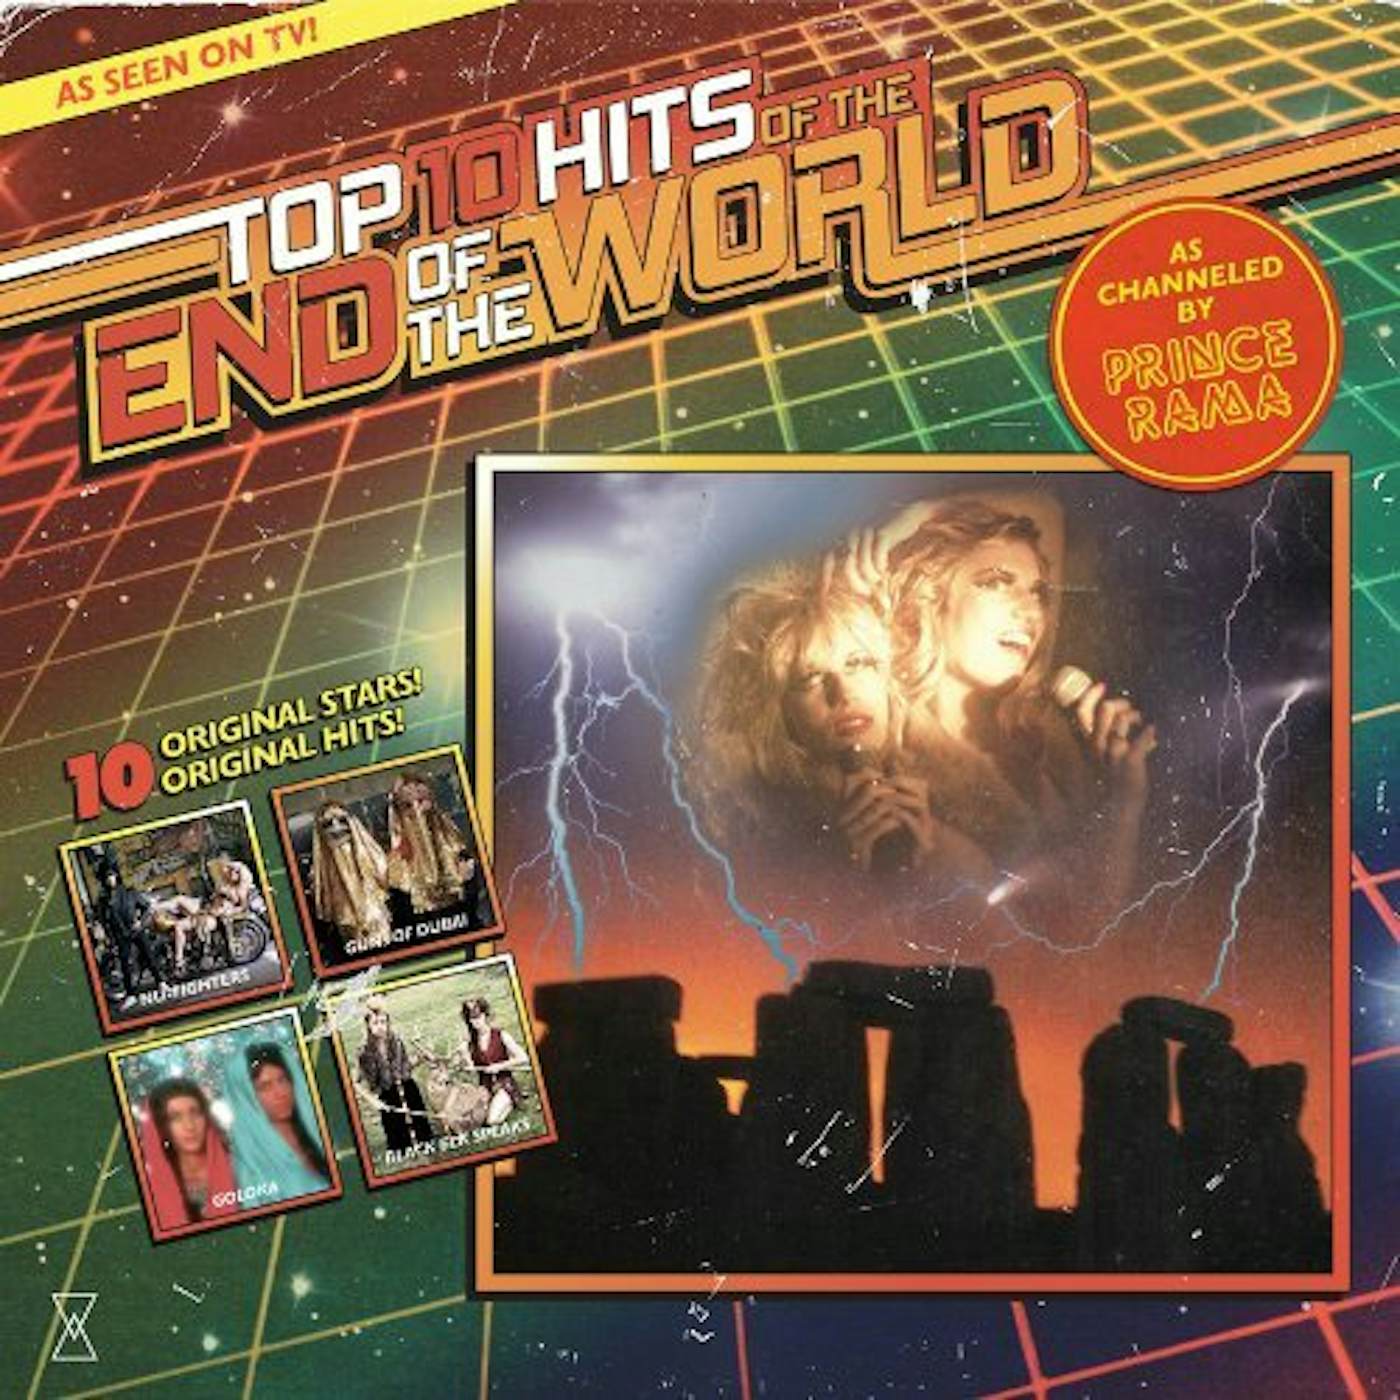 Prince Rama TOP TEN HITS OF THE END OF THE WORLD CD